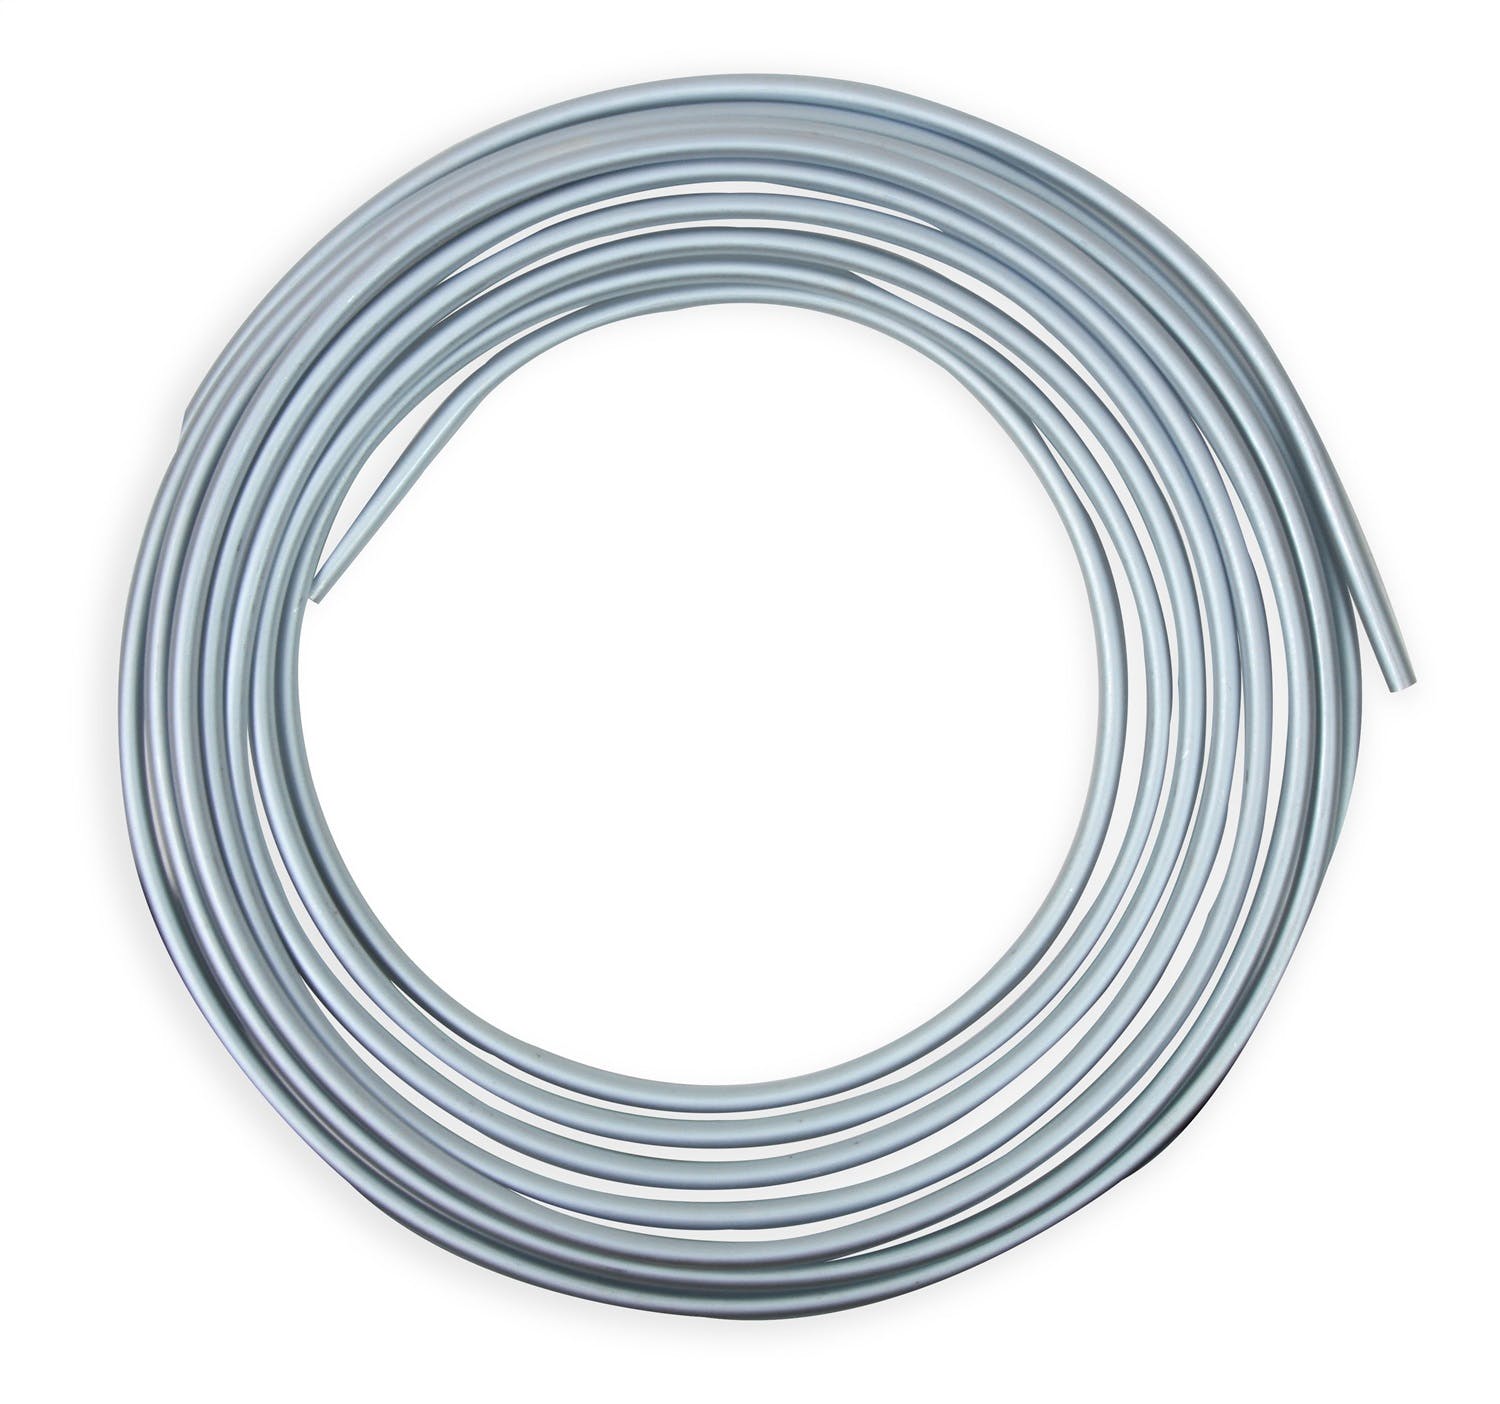 Earl's Performance Plumbing 5/16 inch x 25 foot Coil Zinc Plated ZC651625ERL